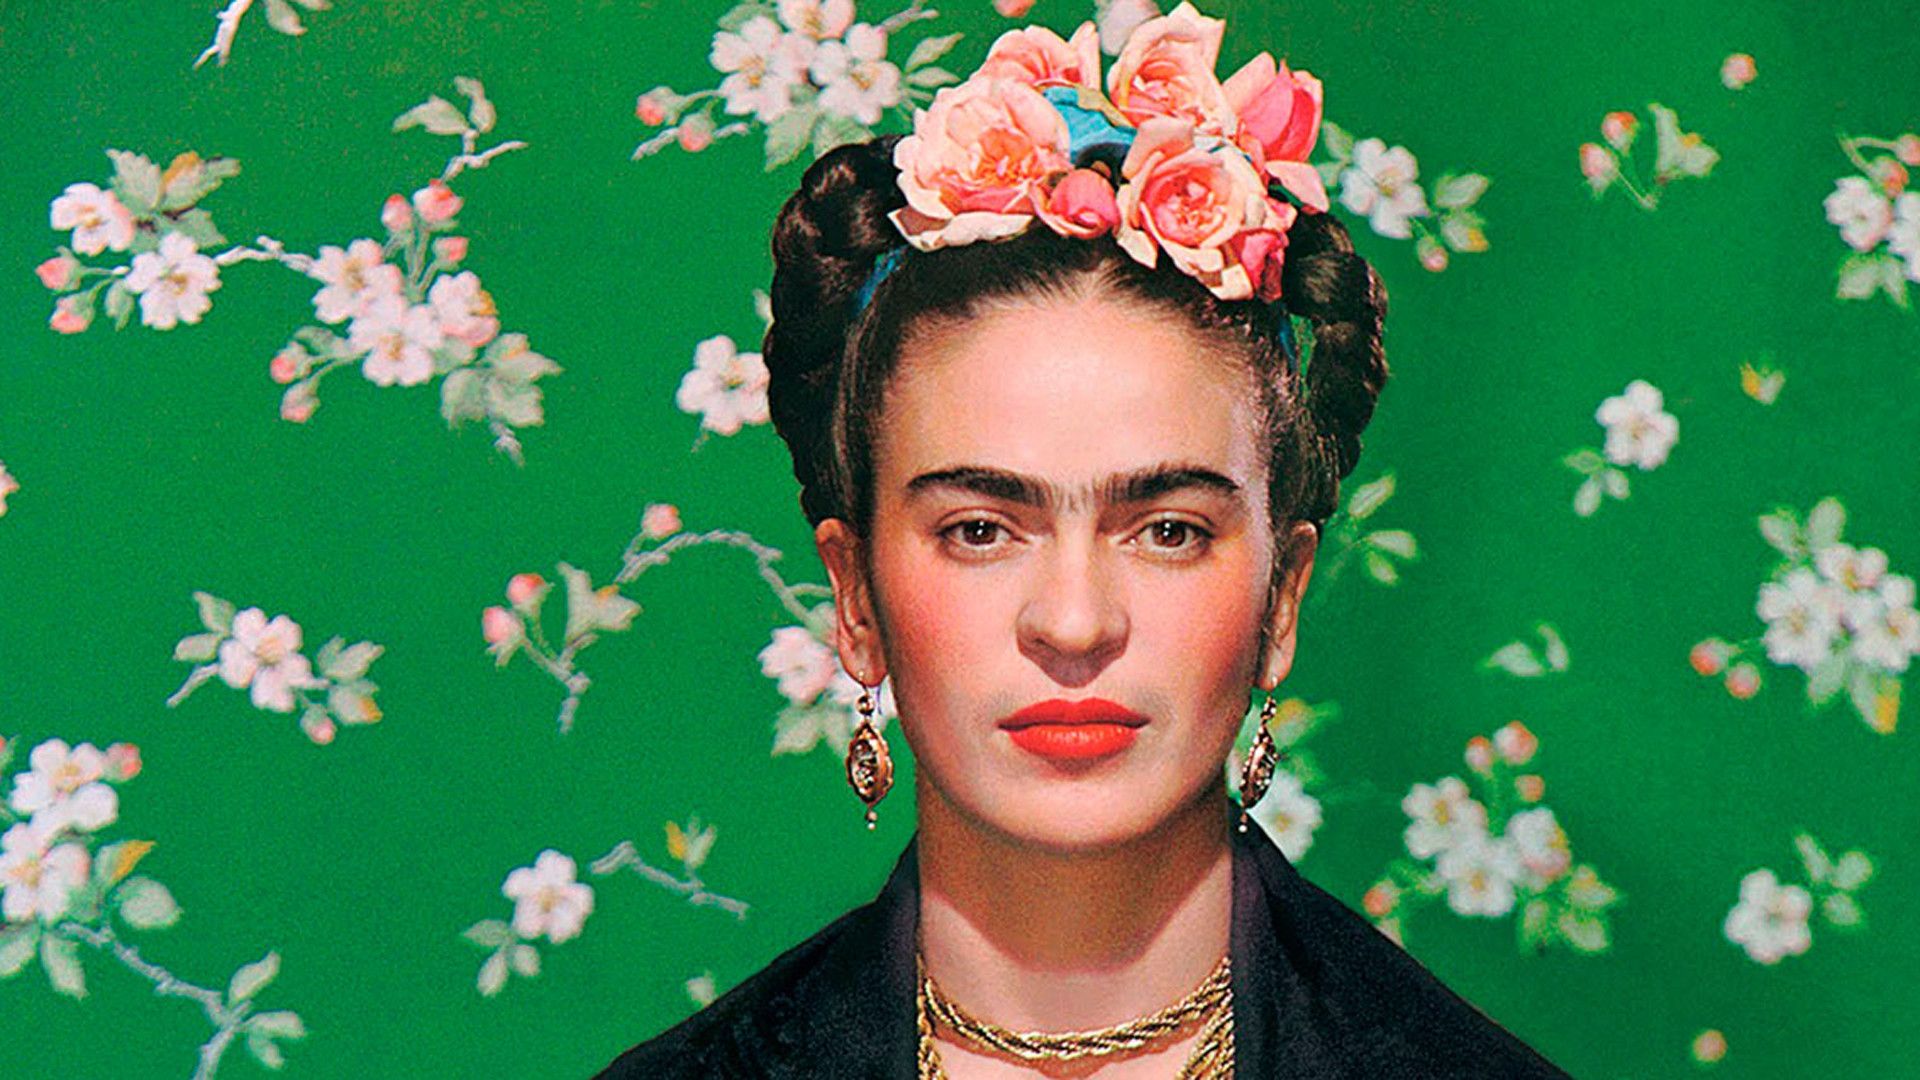 A portrait of Frida Kahlo in front of a green background with flowers. - Frida Kahlo